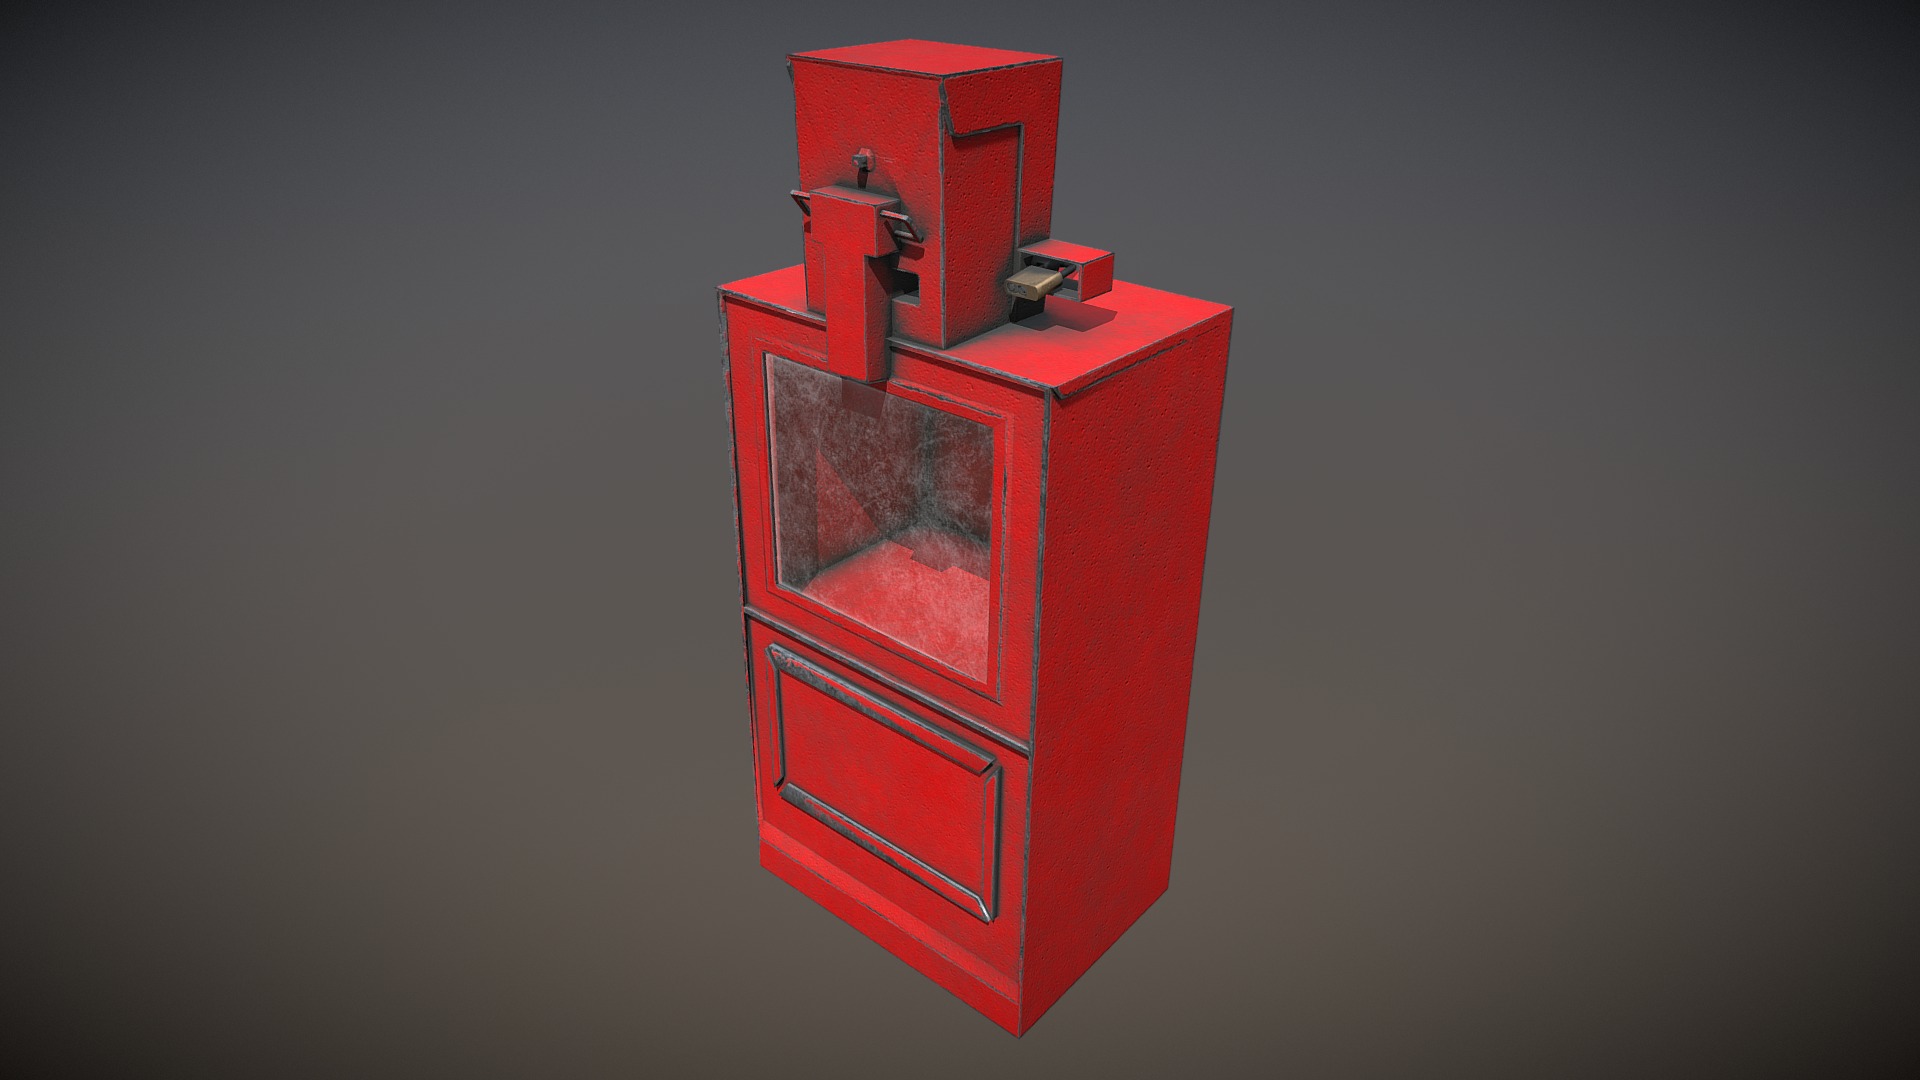 3D model Old News Stand - This is a 3D model of the Old News Stand. The 3D model is about a red and white box.